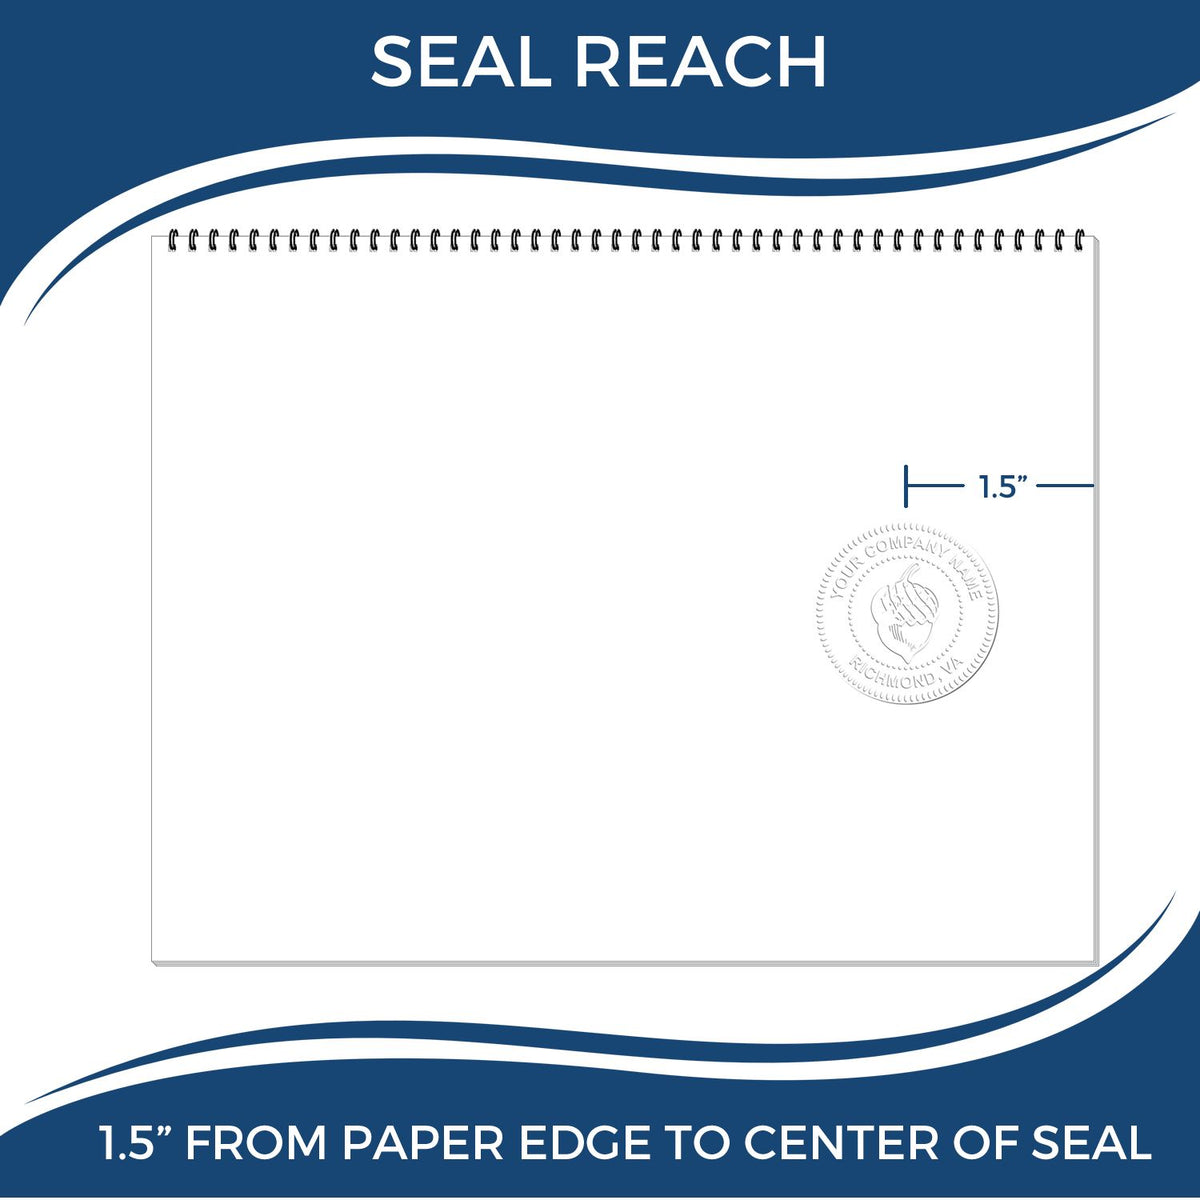 An infographic showing the seal reach which is represented by a ruler and a miniature seal image of the Hybrid Nebraska Landscape Architect Seal